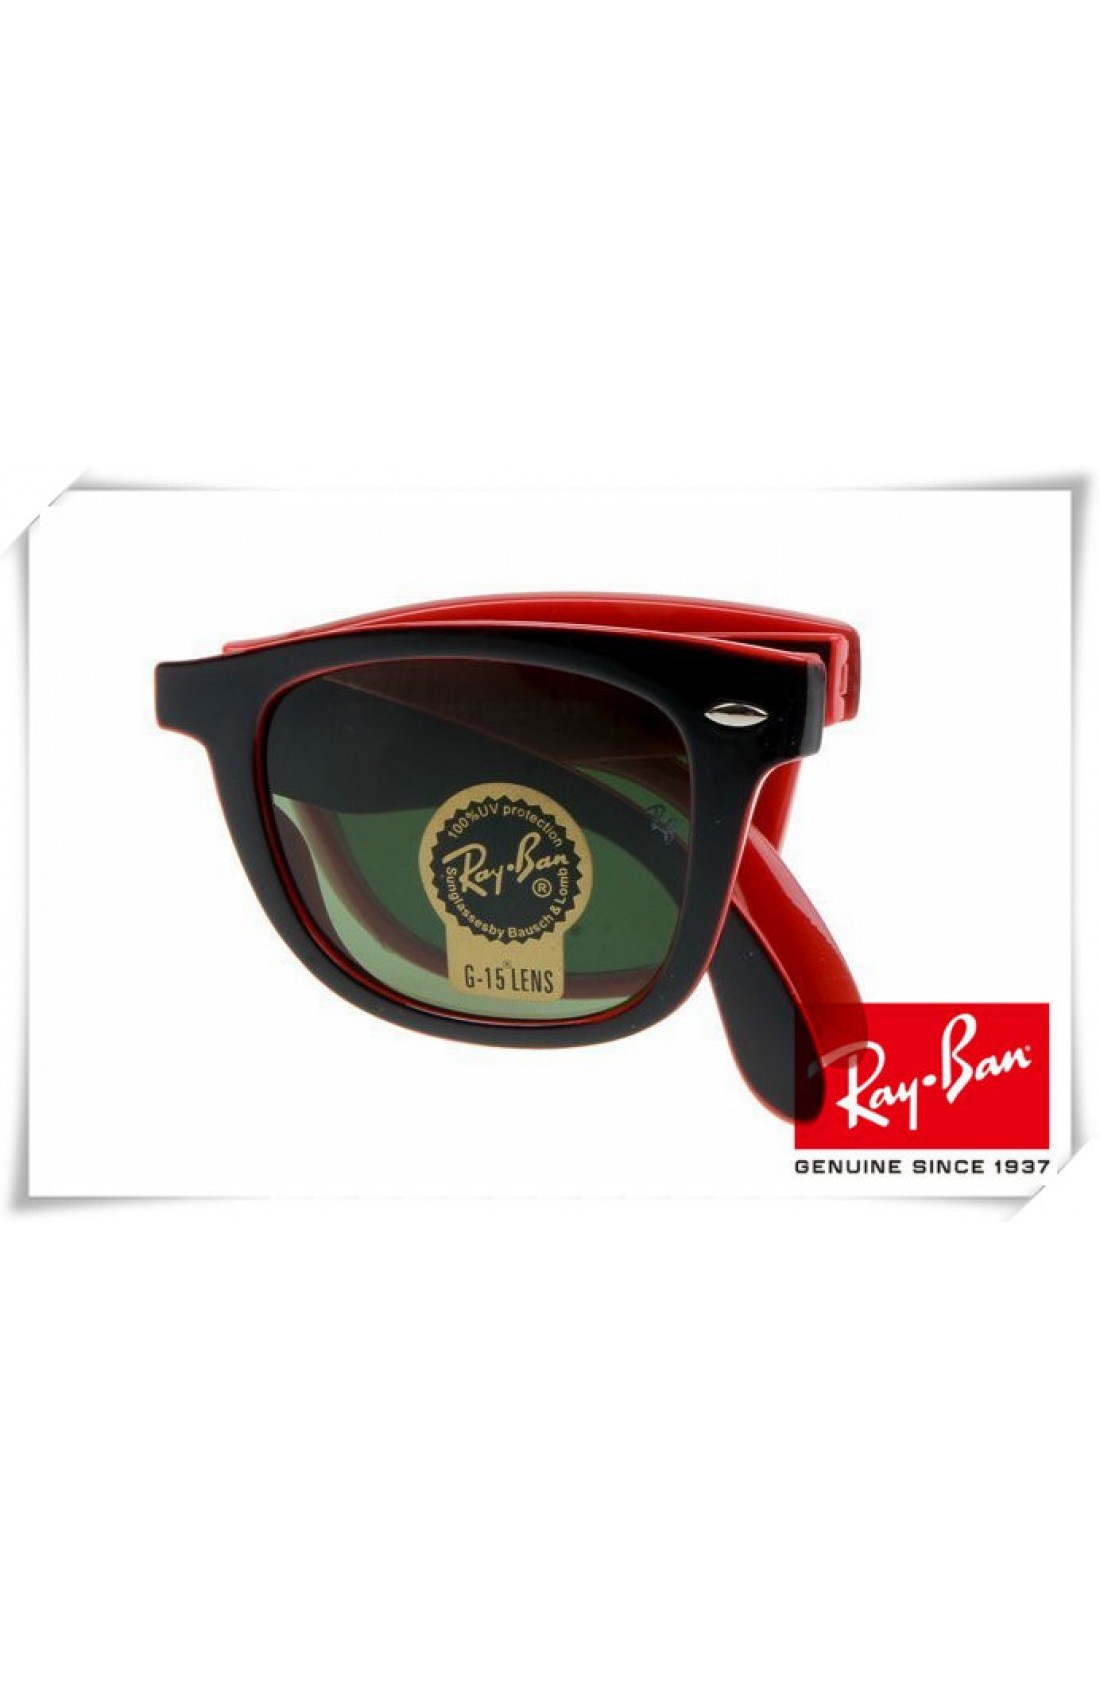 ray ban red and black sunglasses